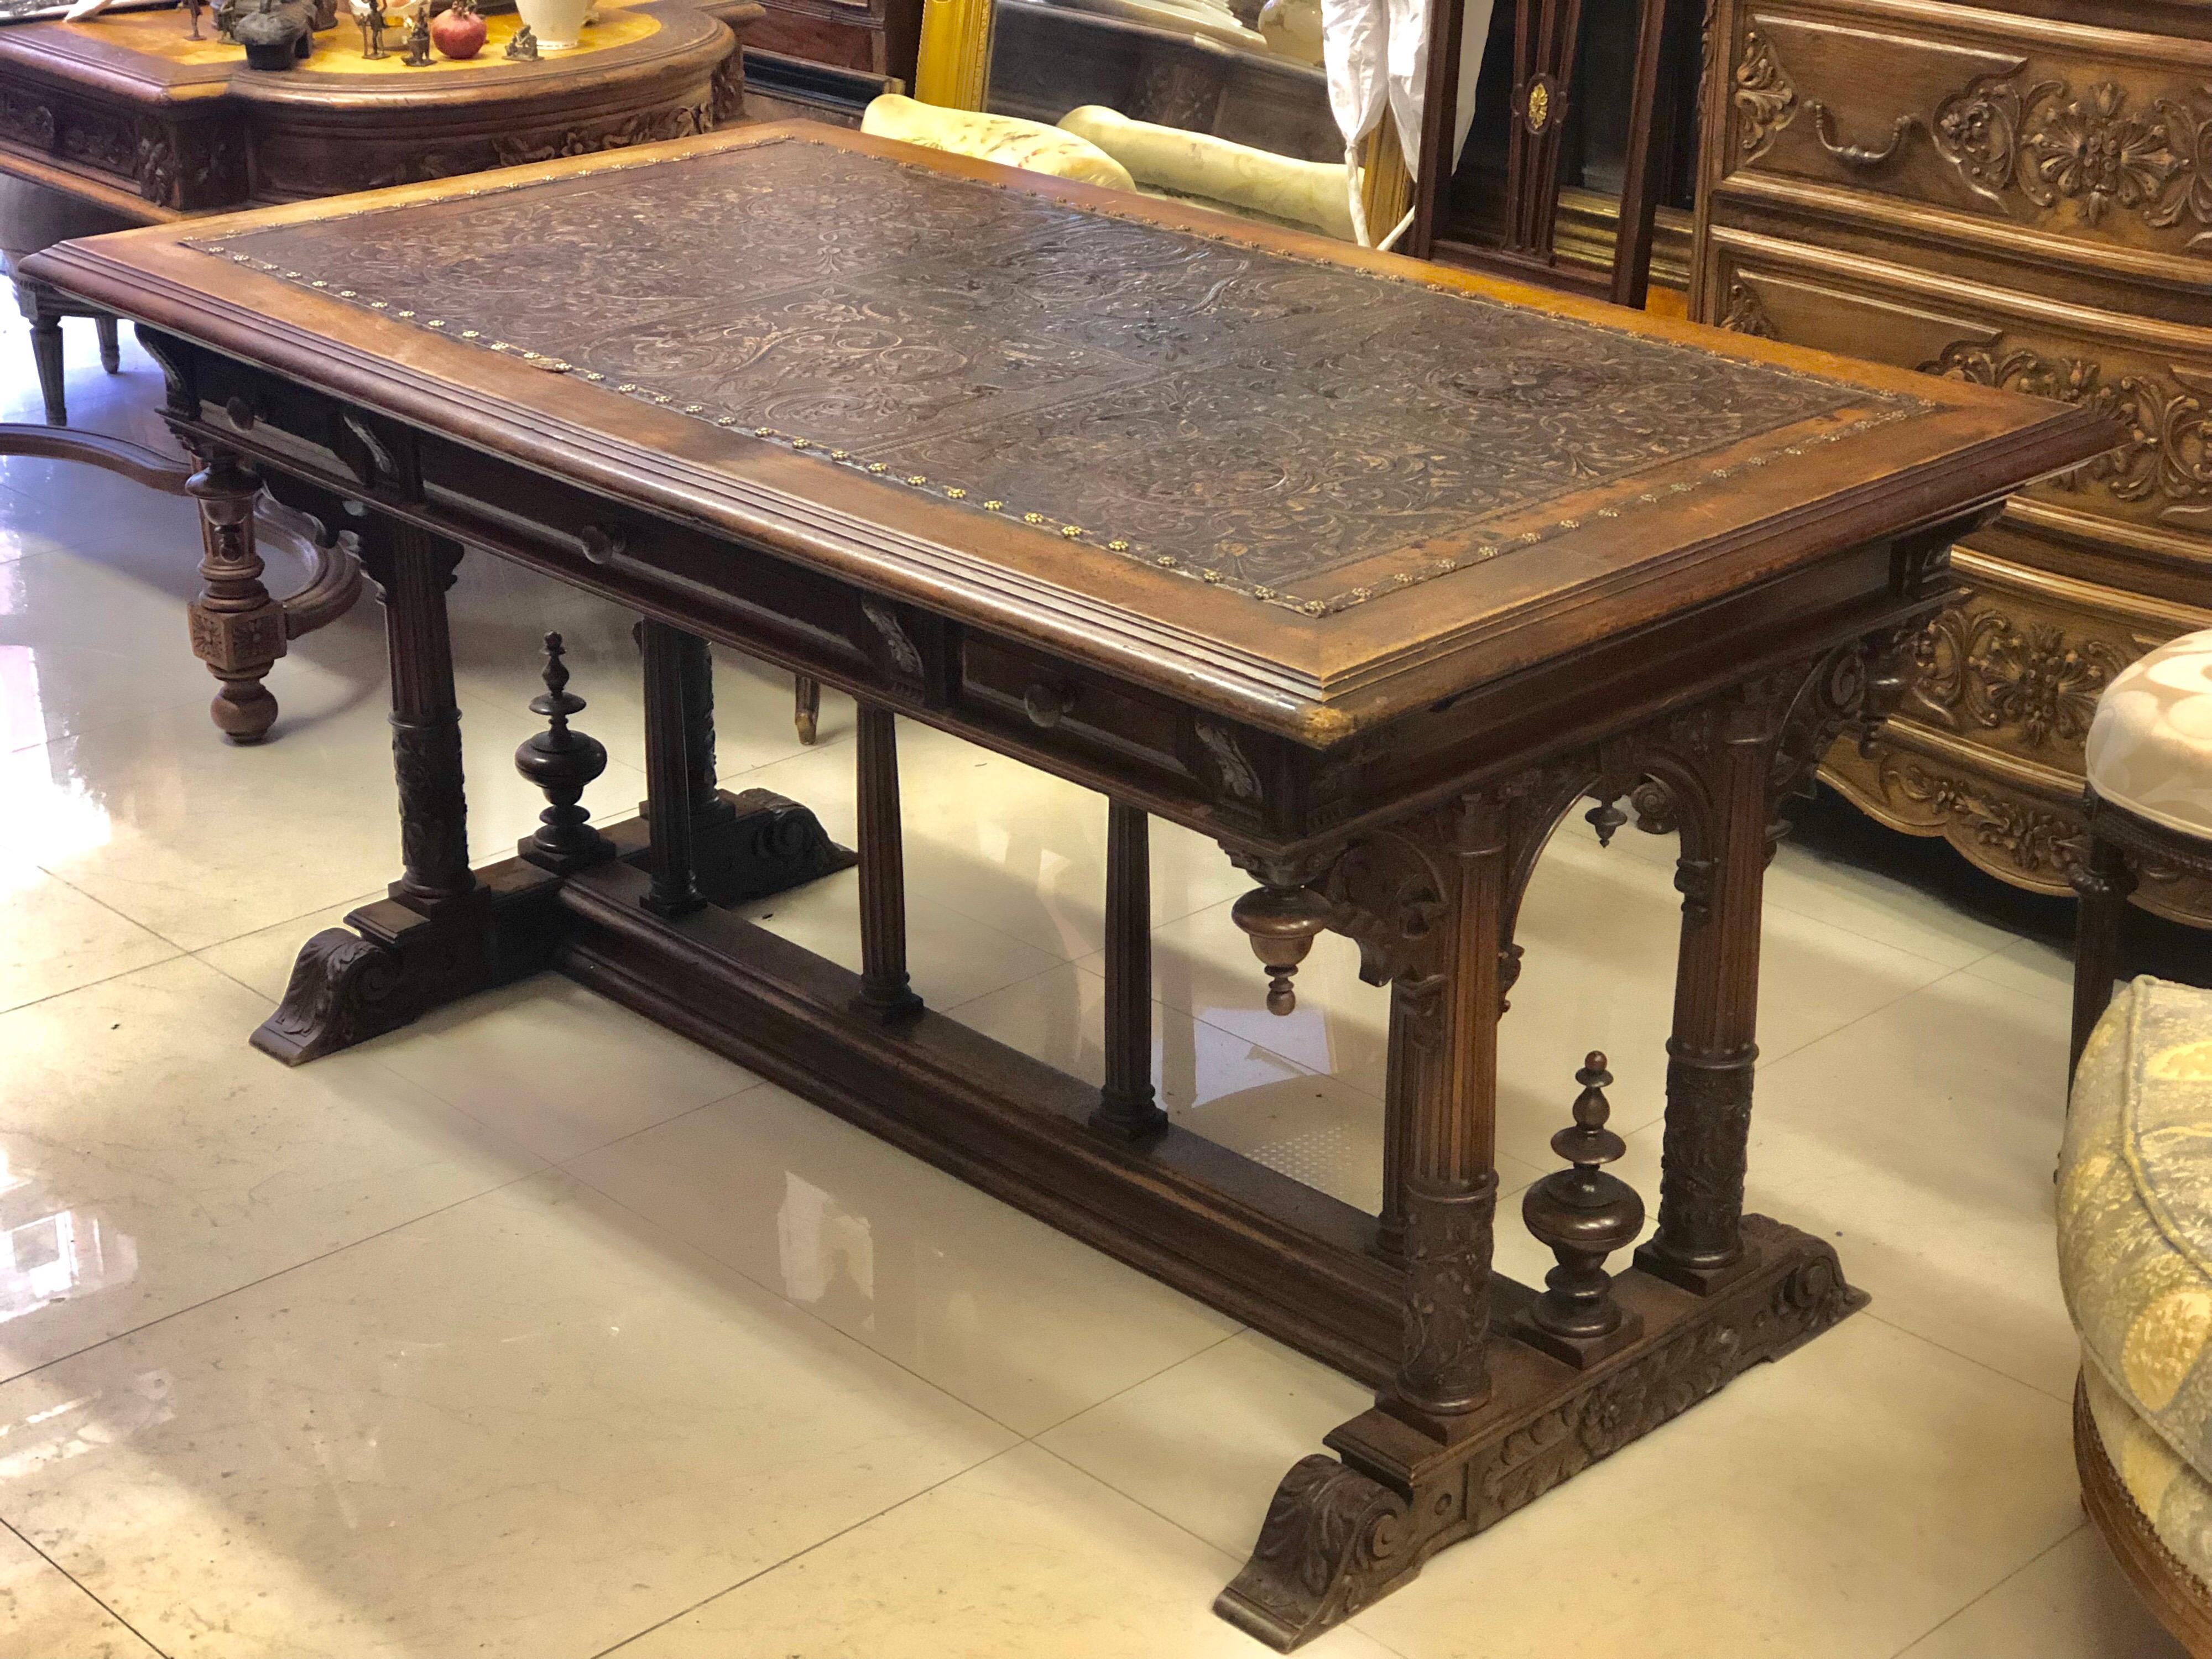 19th century French walnut three-drawer desk table with moulded and carved acanthus leaves, scrolls and foliage decorated with arcane. The base is standing on four columns on a skid and spacer in H with four balusters. The leather top is in great